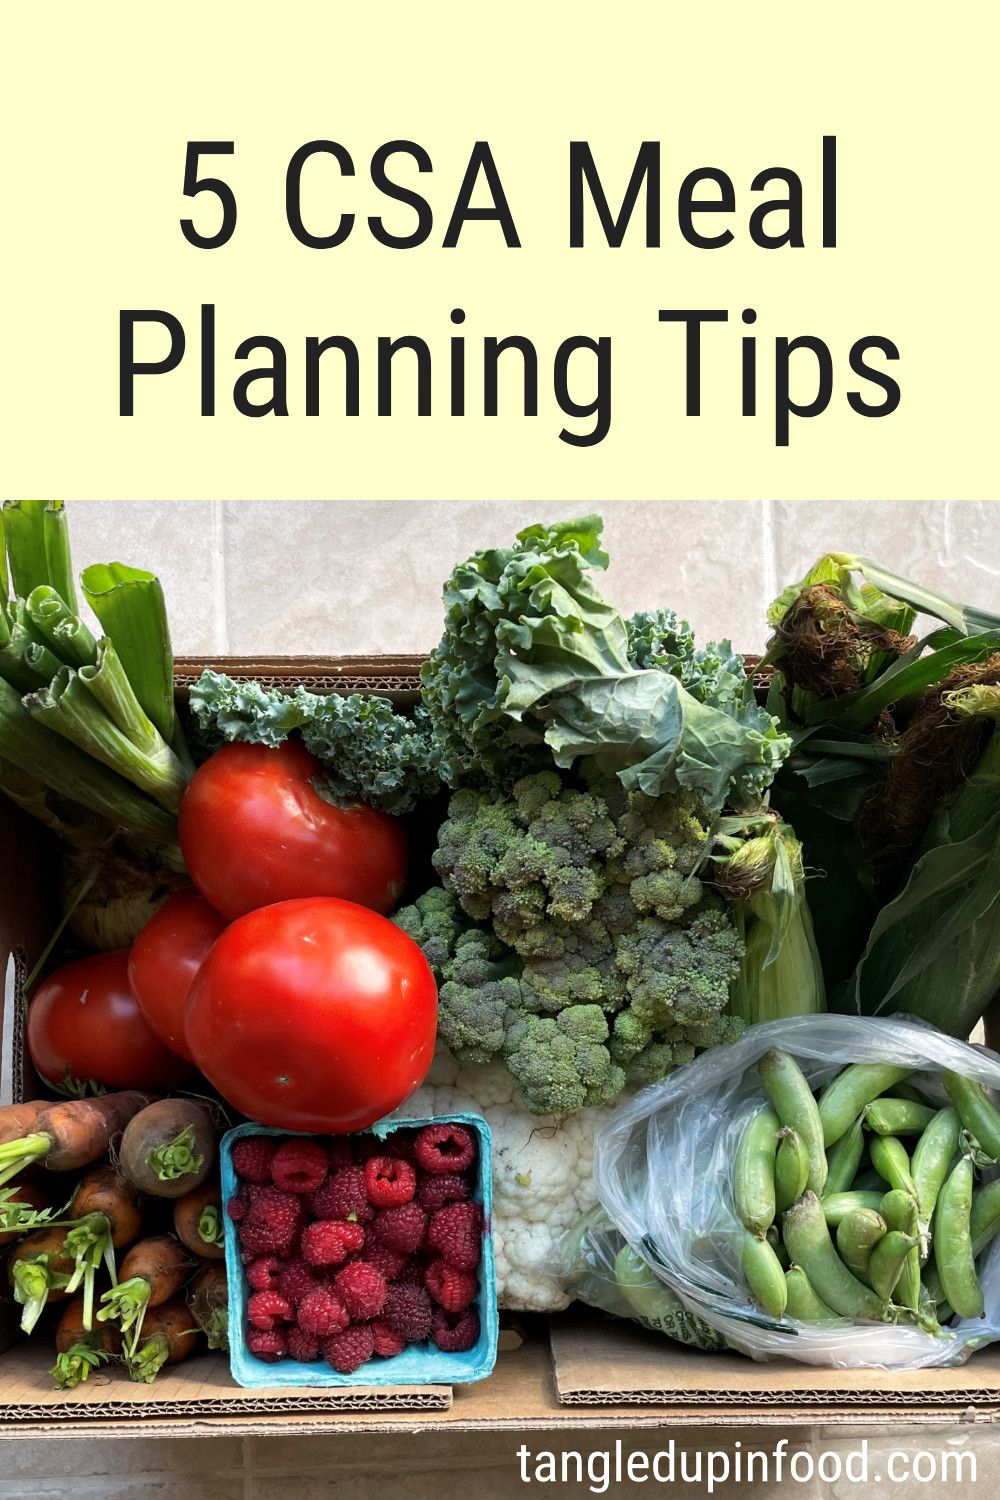 Cardboard box of produce with text reading "5 CSA meal planning tips"